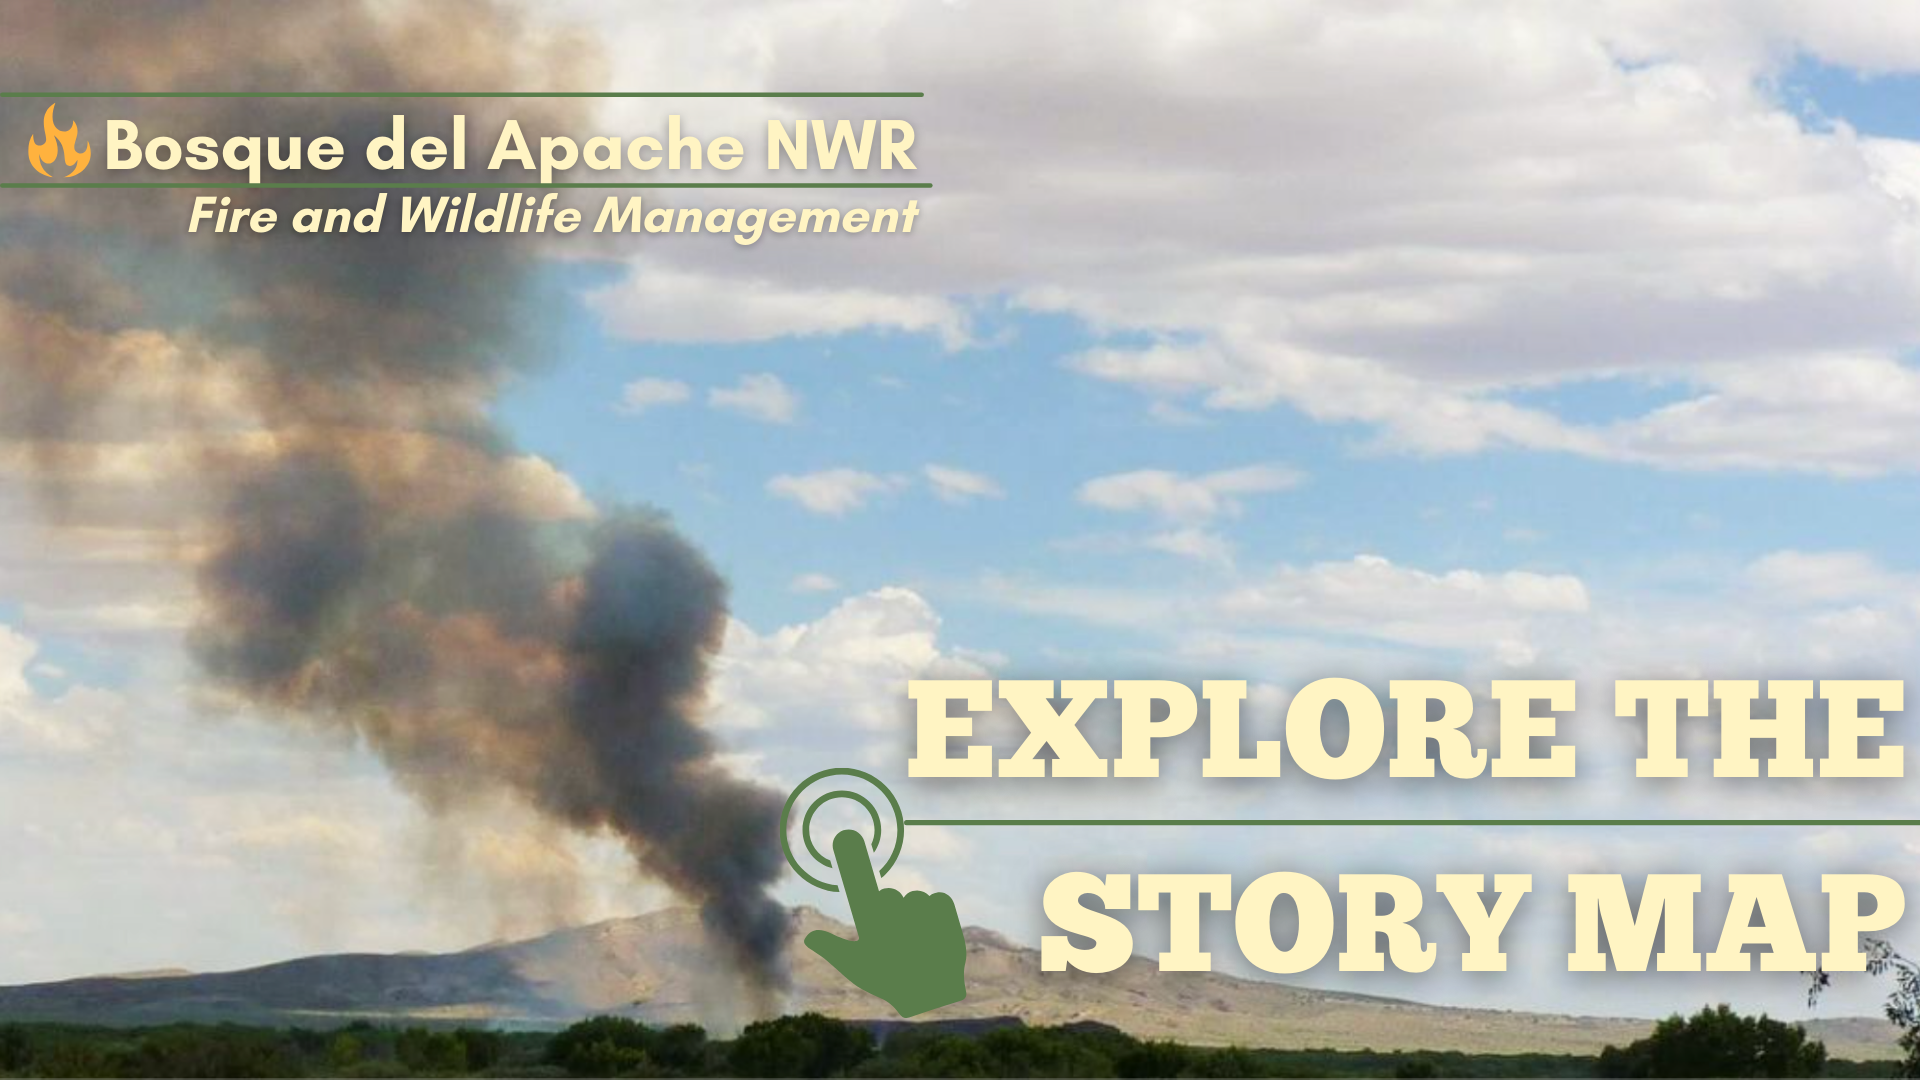 Image Text reads: "Bosque del Apache NWR, Fire and Wildlife Management" in the upper left corner and "Explore the Story Map" in the lower right corner. The background image shows smoke rising from the Bosque del Apache NWR. 